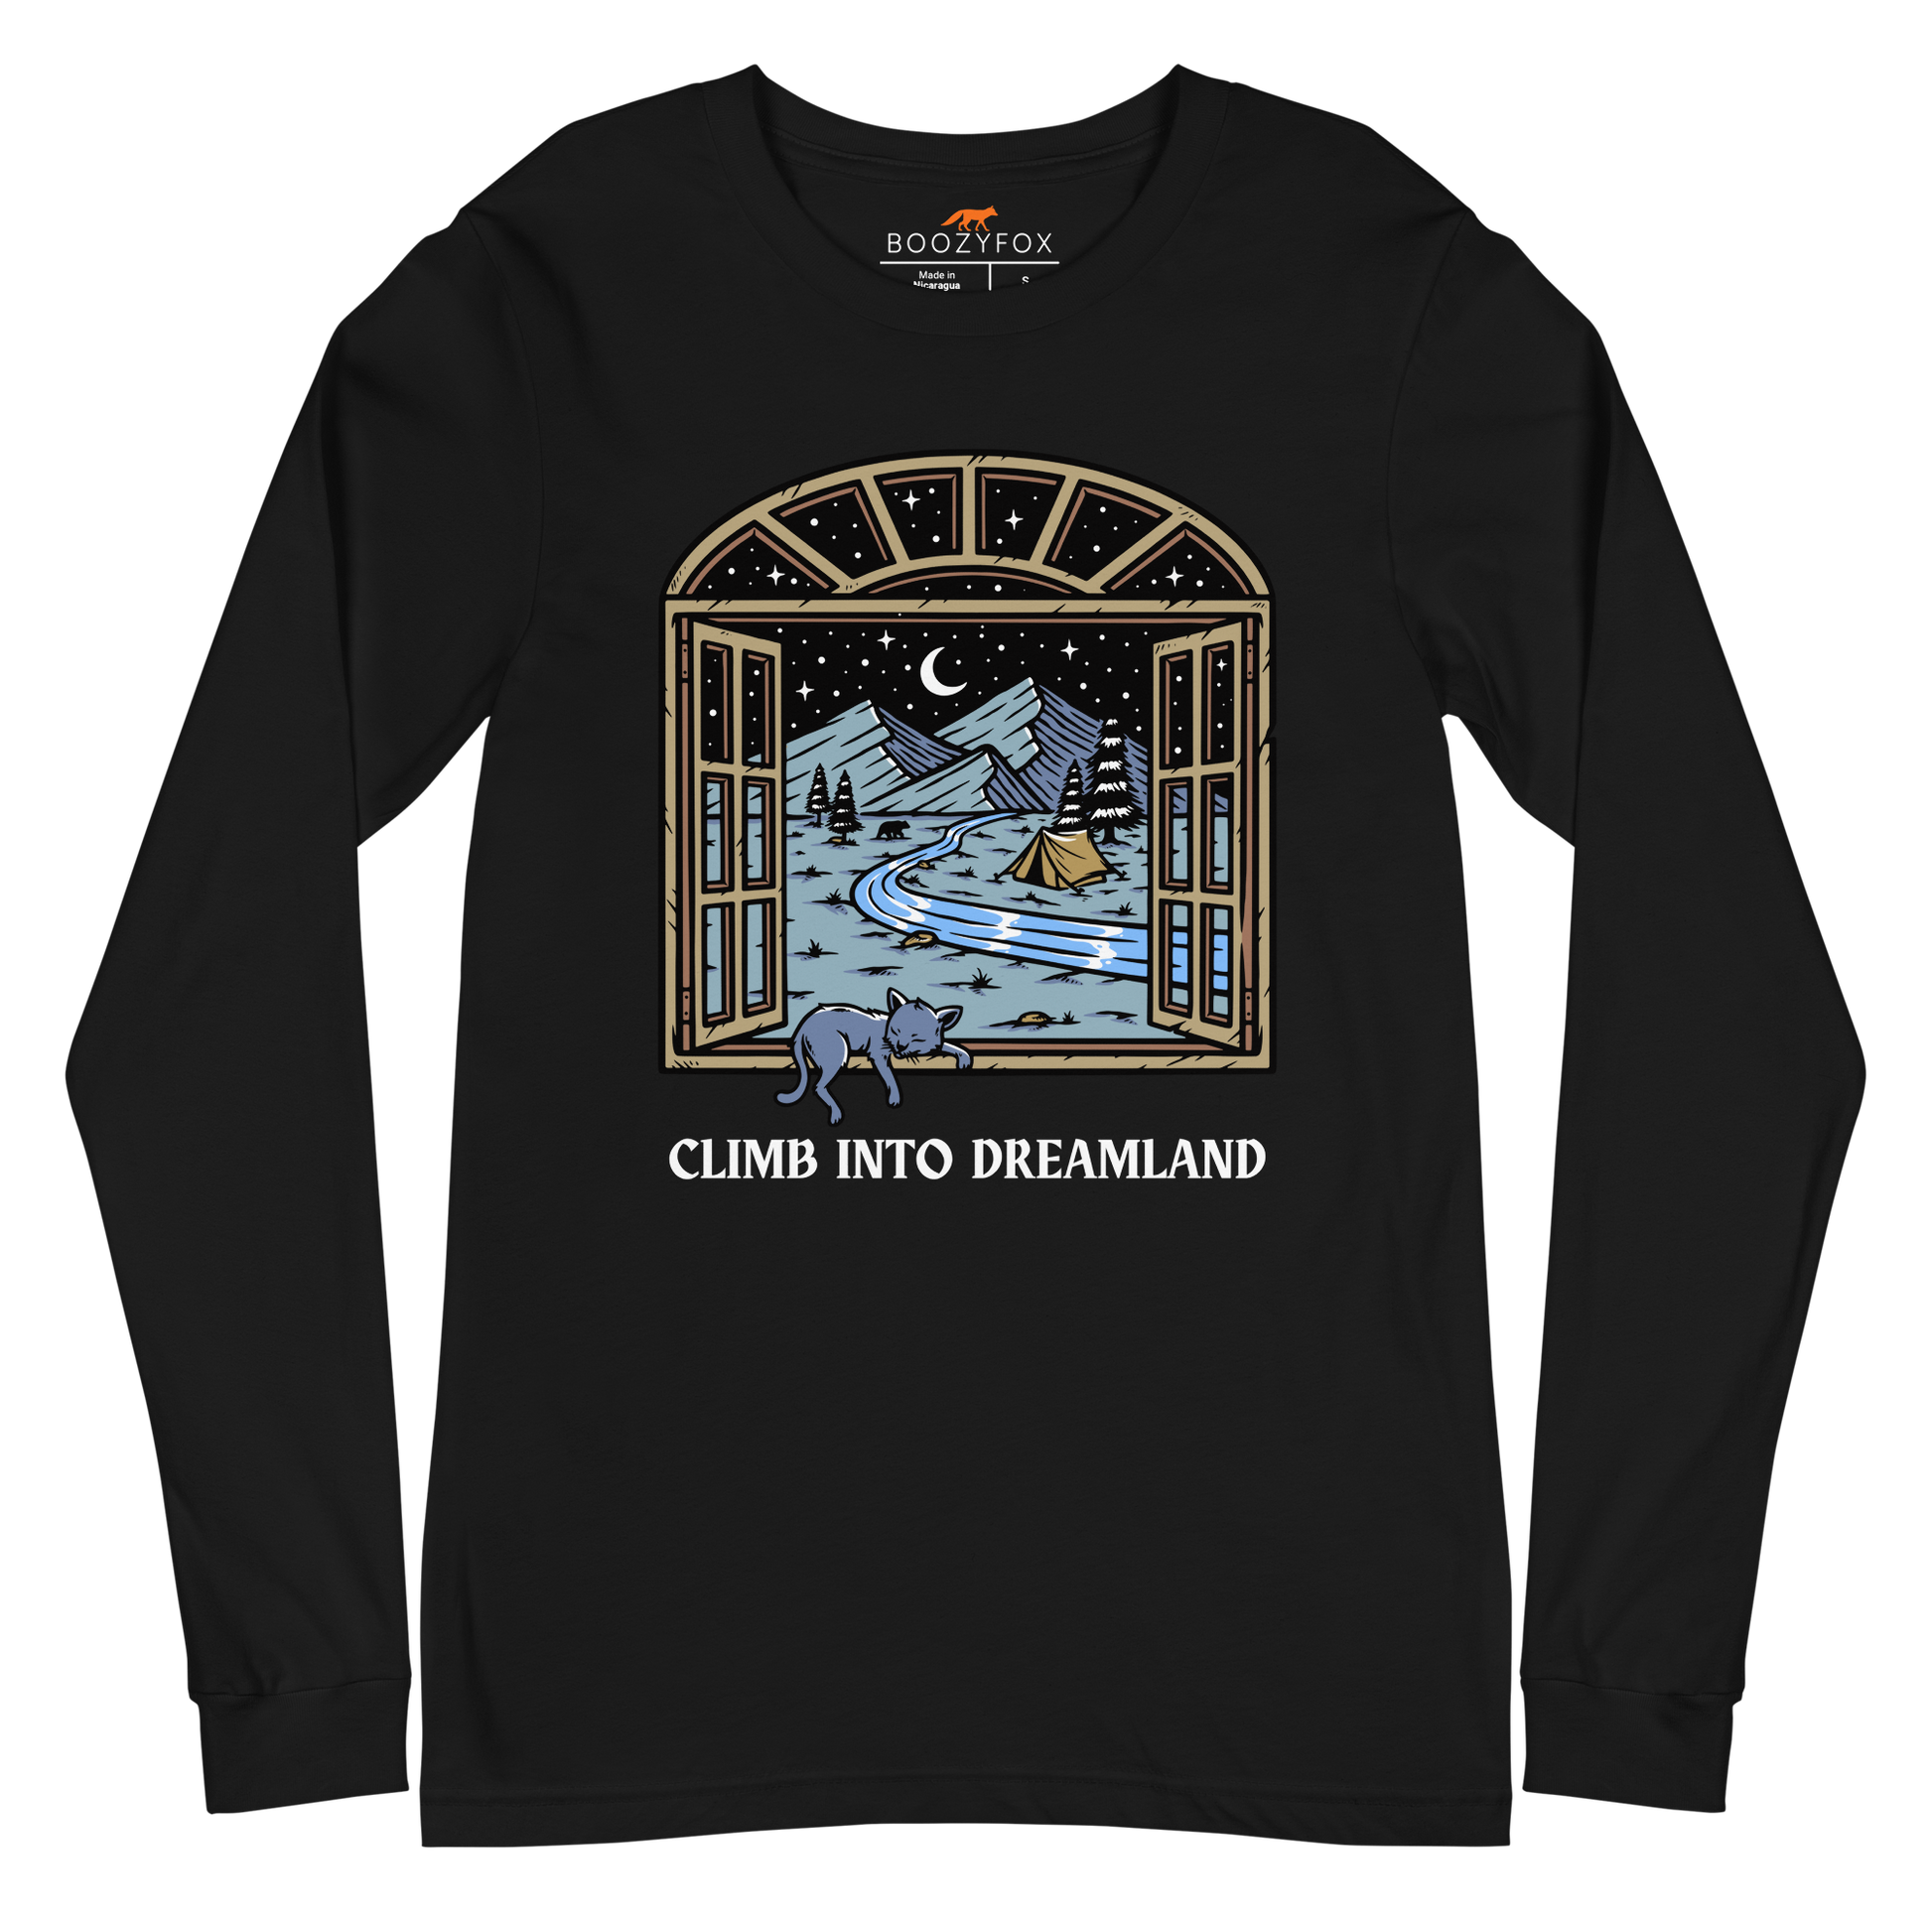 Black Climb Into Dreamland Long Sleeve Tee featuring a mesmerizing mountain view graphic on the chest - Cool Nature Long Sleeve Graphic Tees - Boozy Fox